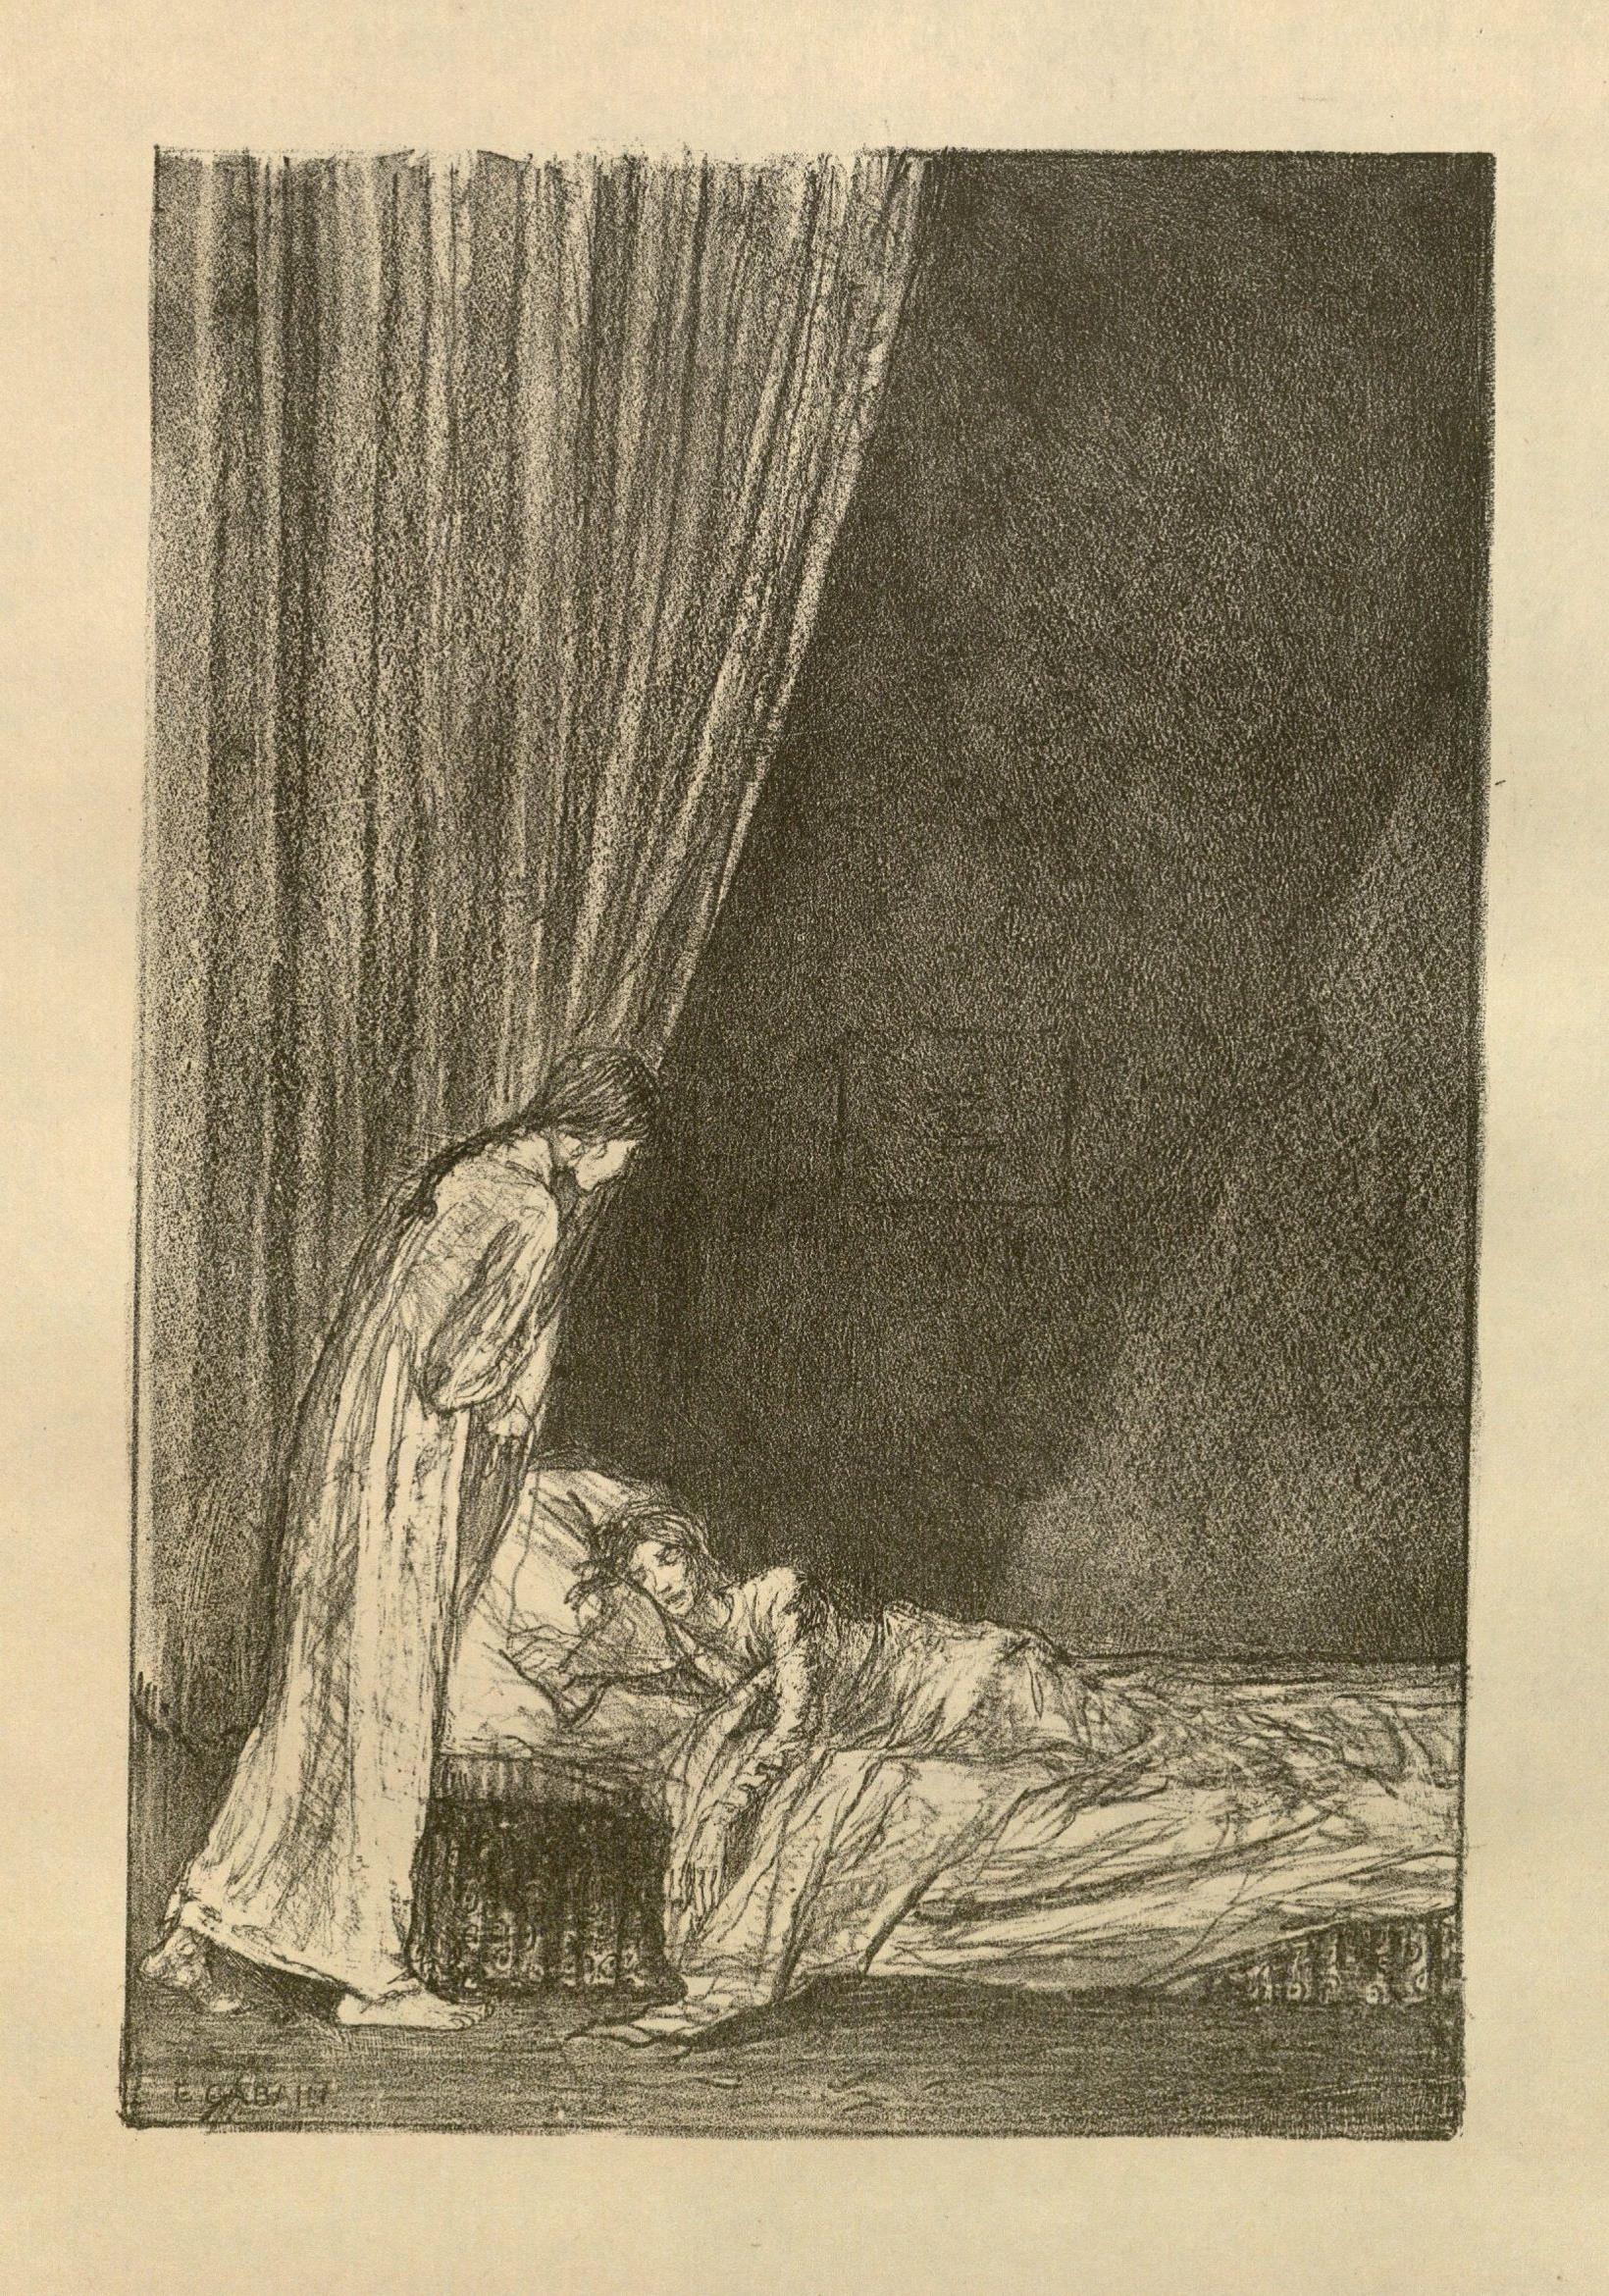 Lithograph by Ethel Gabain from Imprimerie Nationale’s 1923 edition of Jane Eyre. This illustration depicts Jane Eyre at the puritanical Lowood School visiting her dying friend, Helen Burns. 